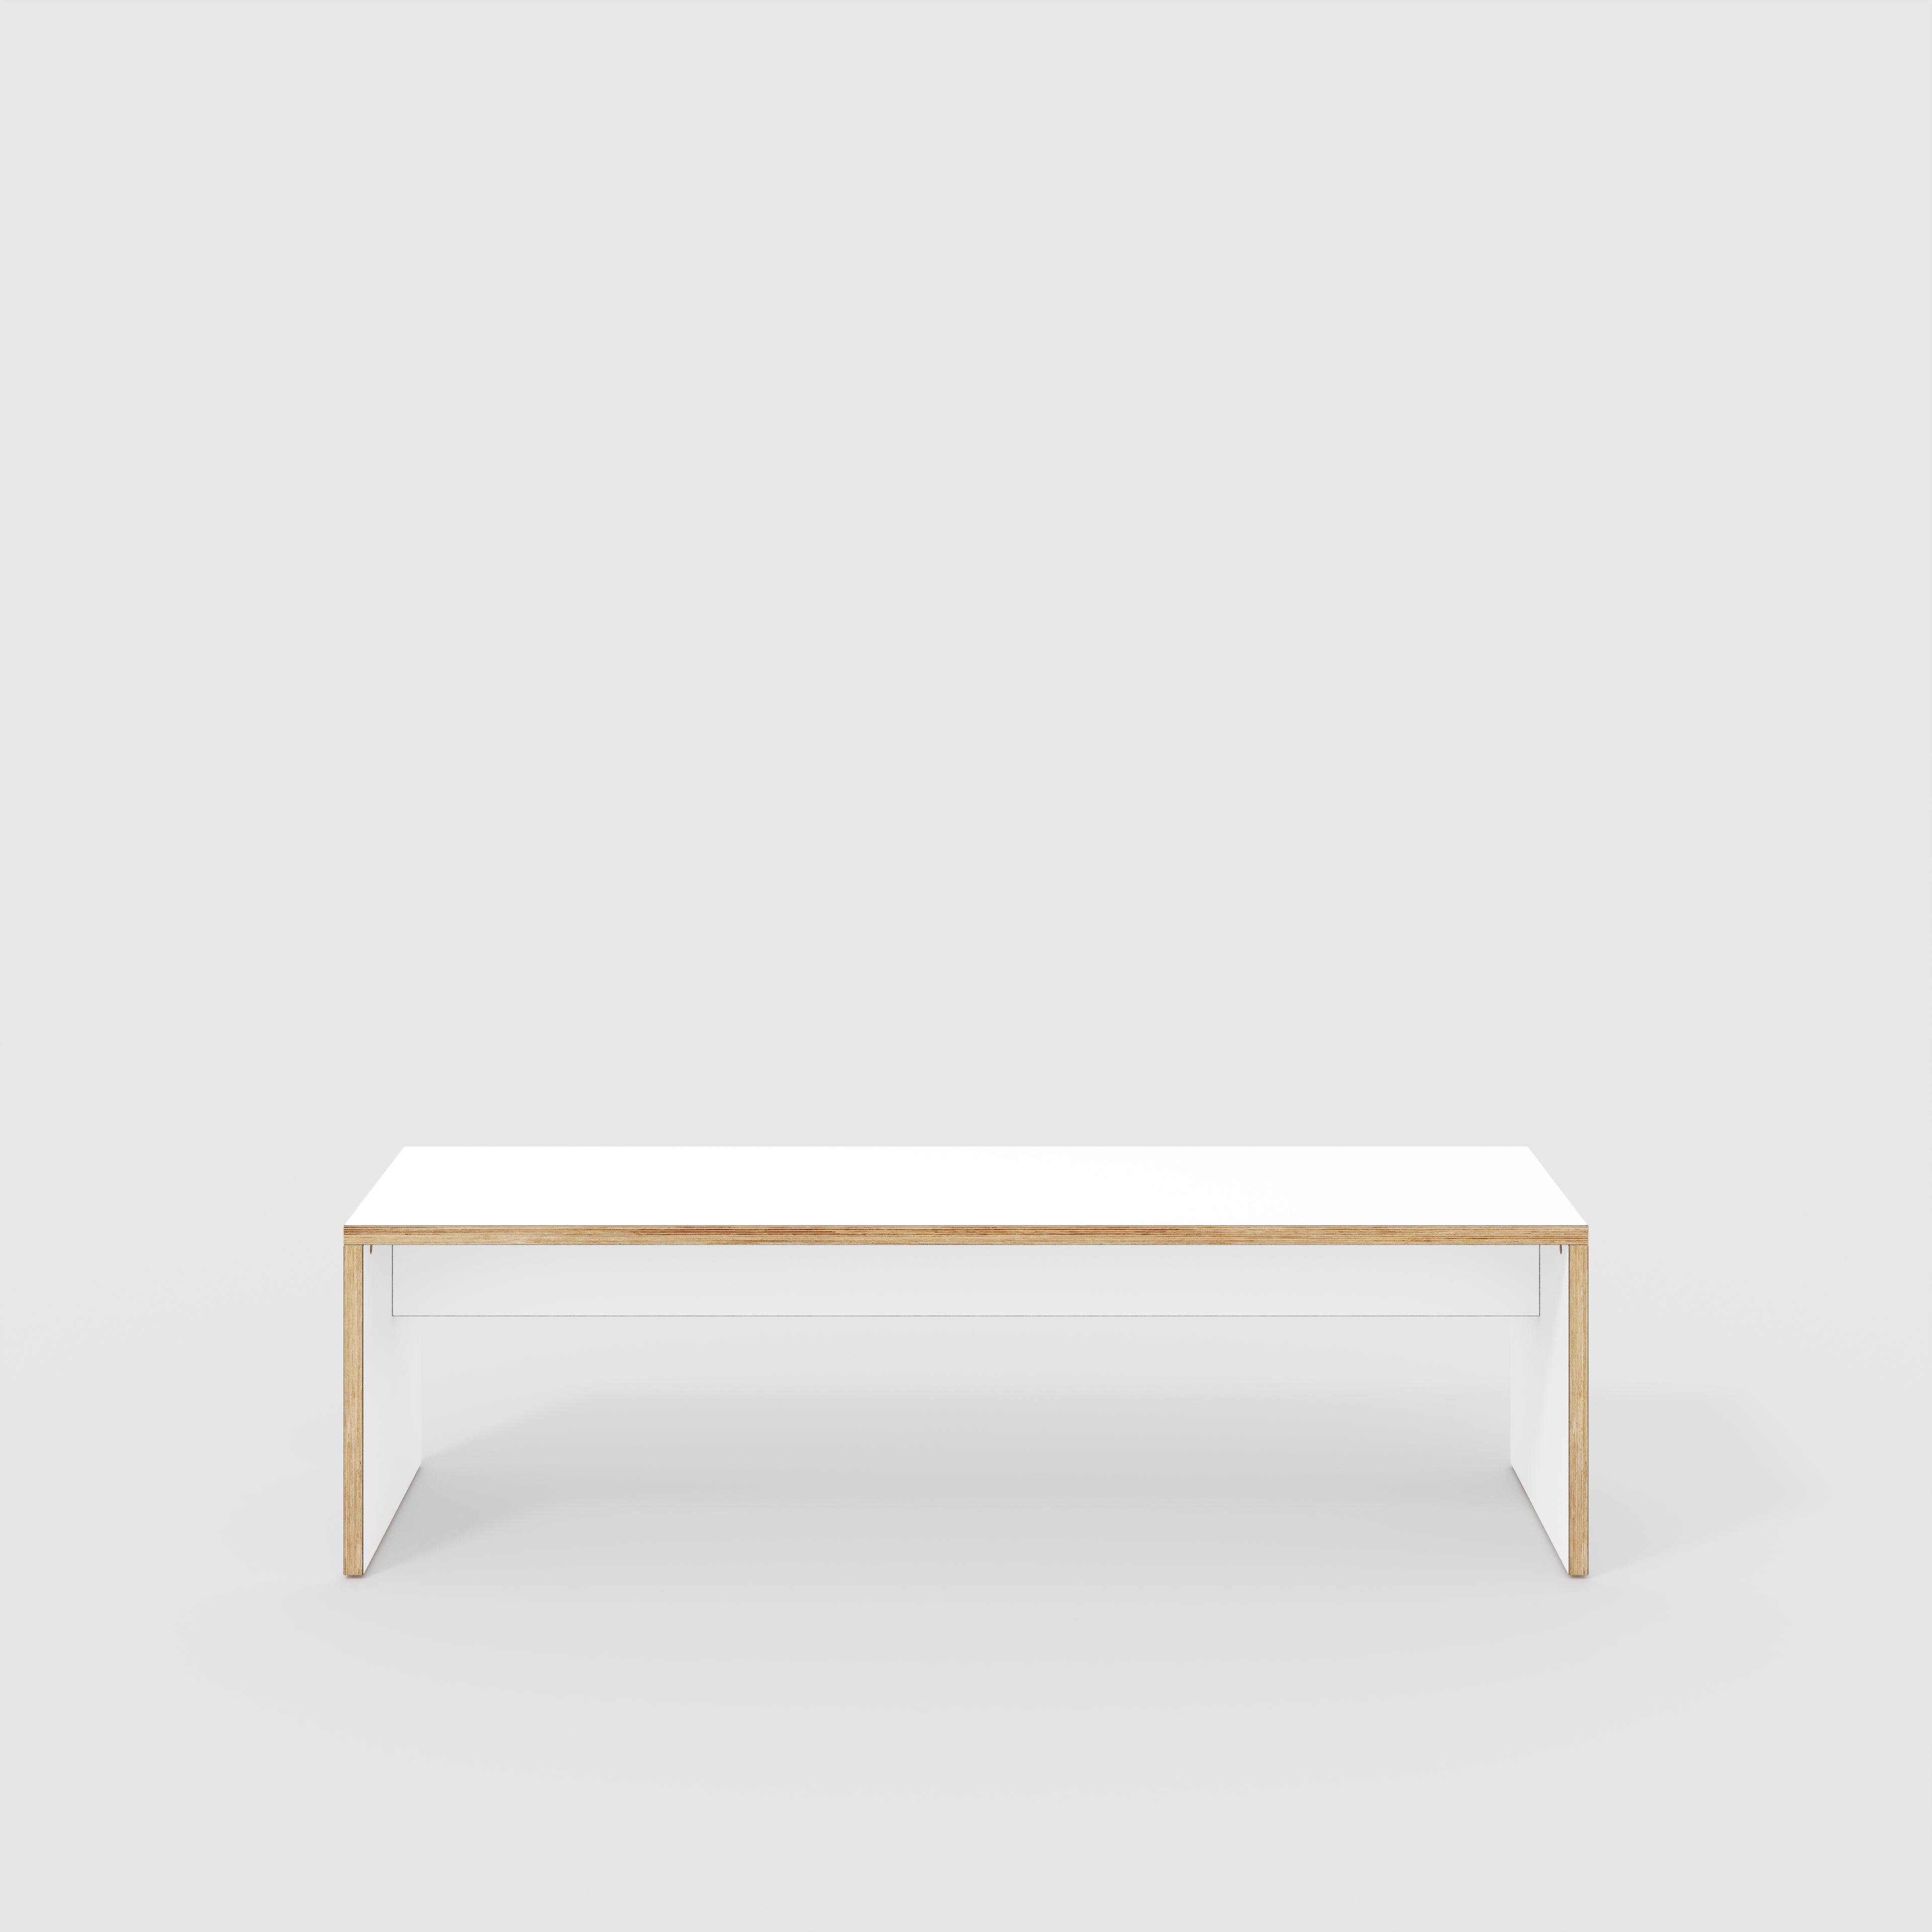 Bench Seat with Solid Sides - Formica White - 1600(w) x 400(d)